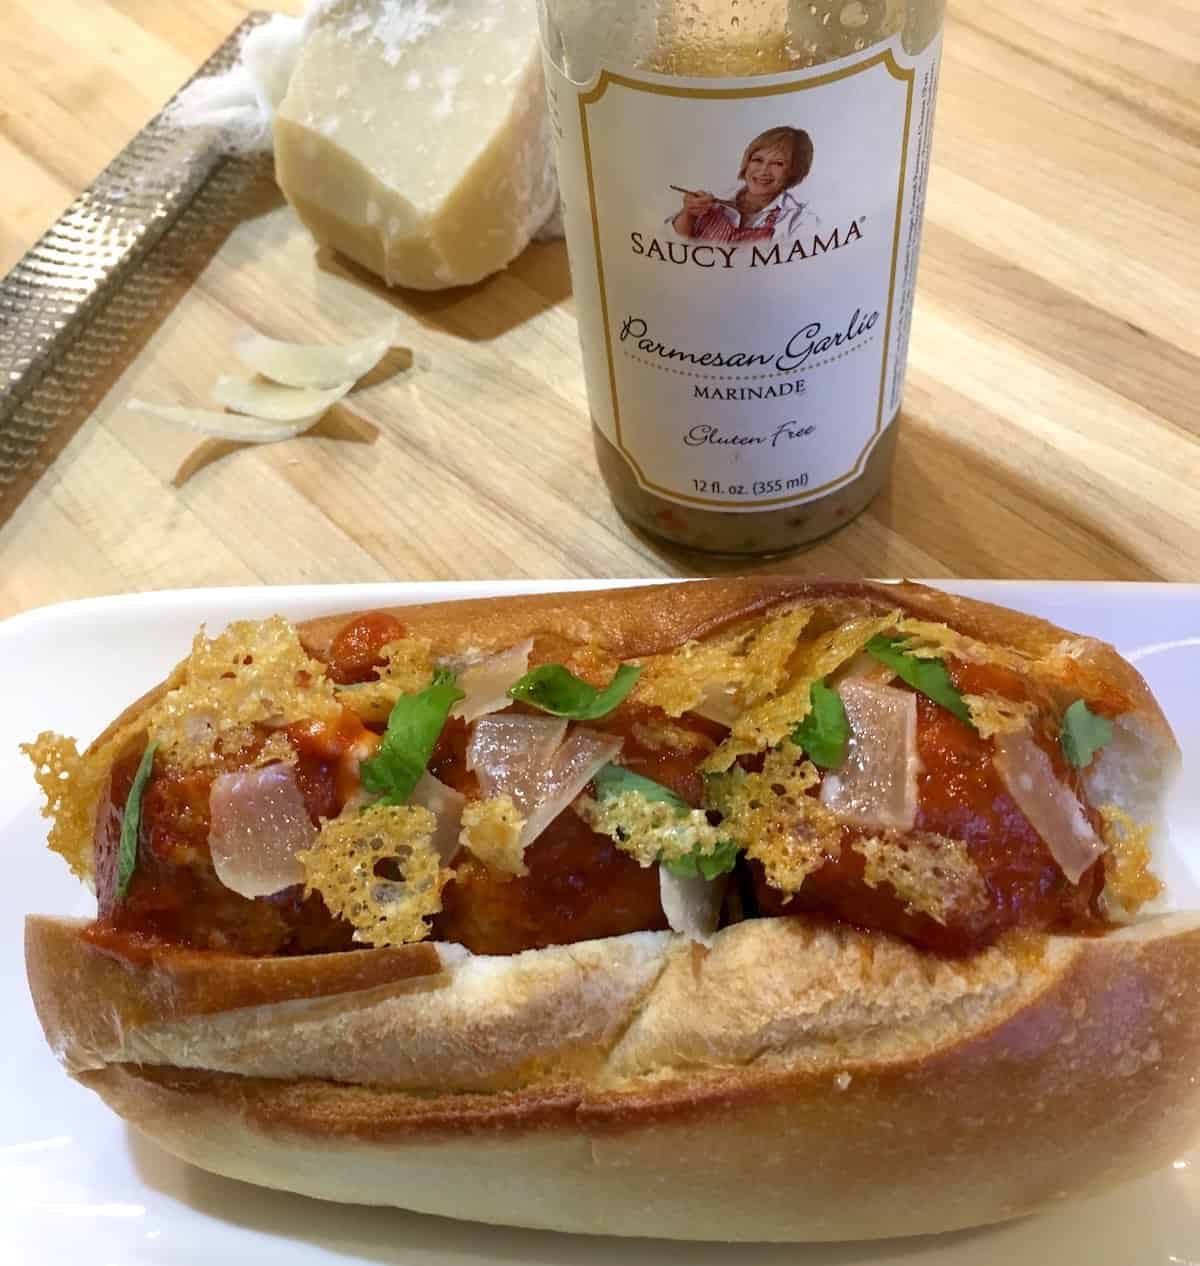 Saucy Mama meatball sub with product bottle